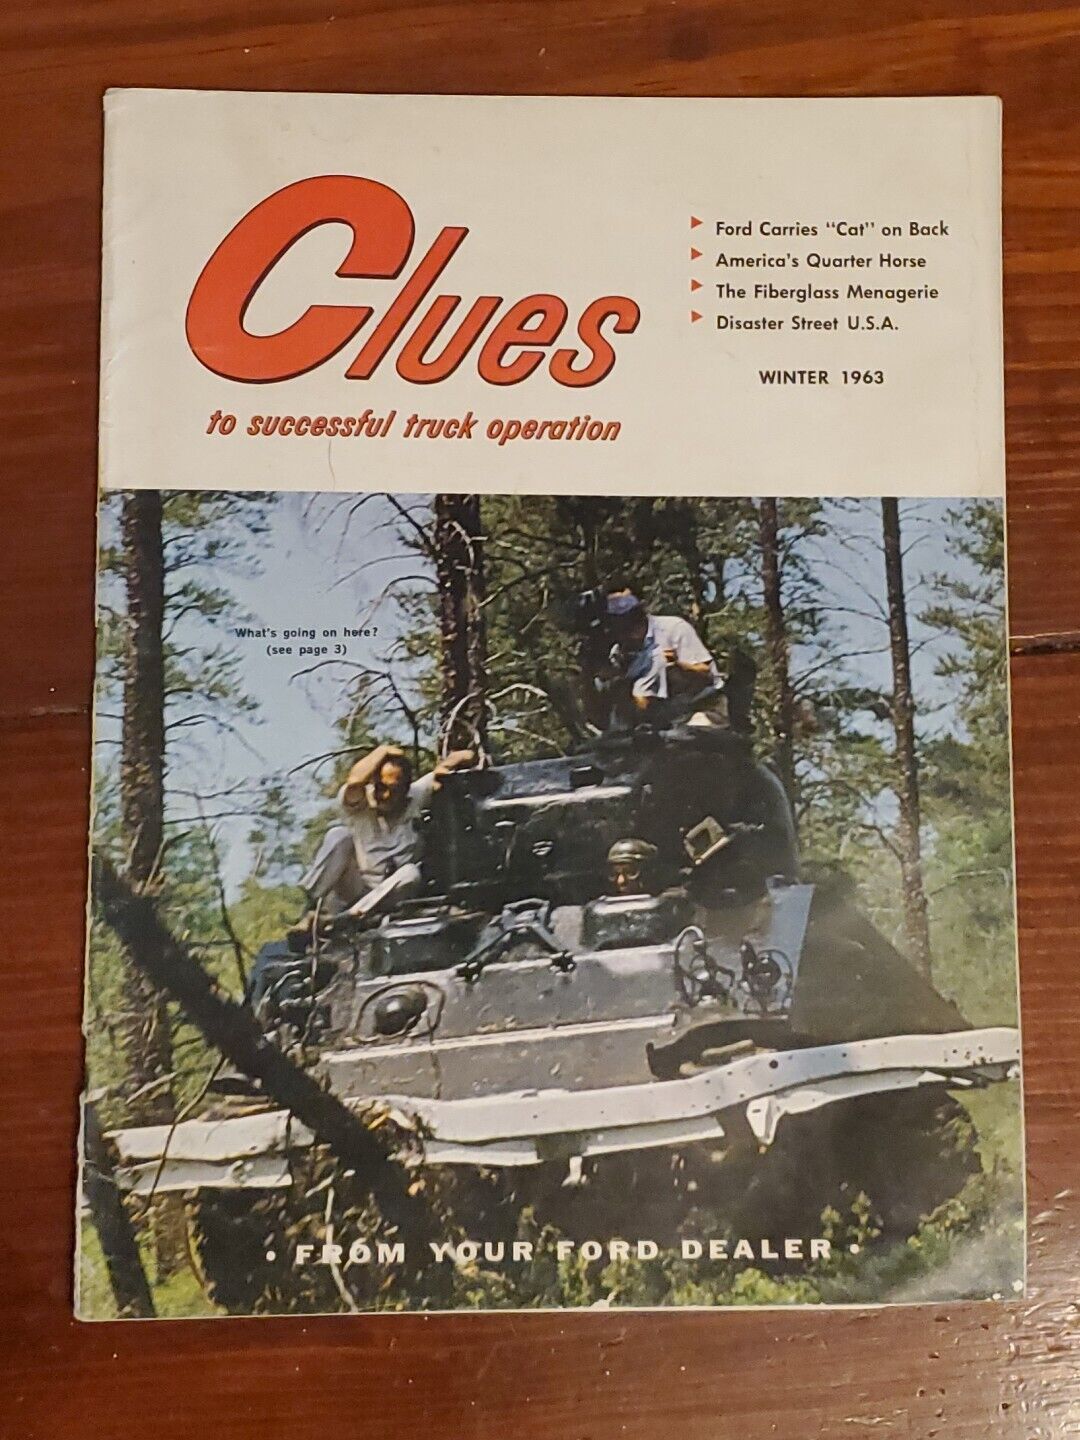 1963 Ford Truck Magazine - CLUES TO SUCCESSFUL TRUCK OPERATION by Ford Motor Co.